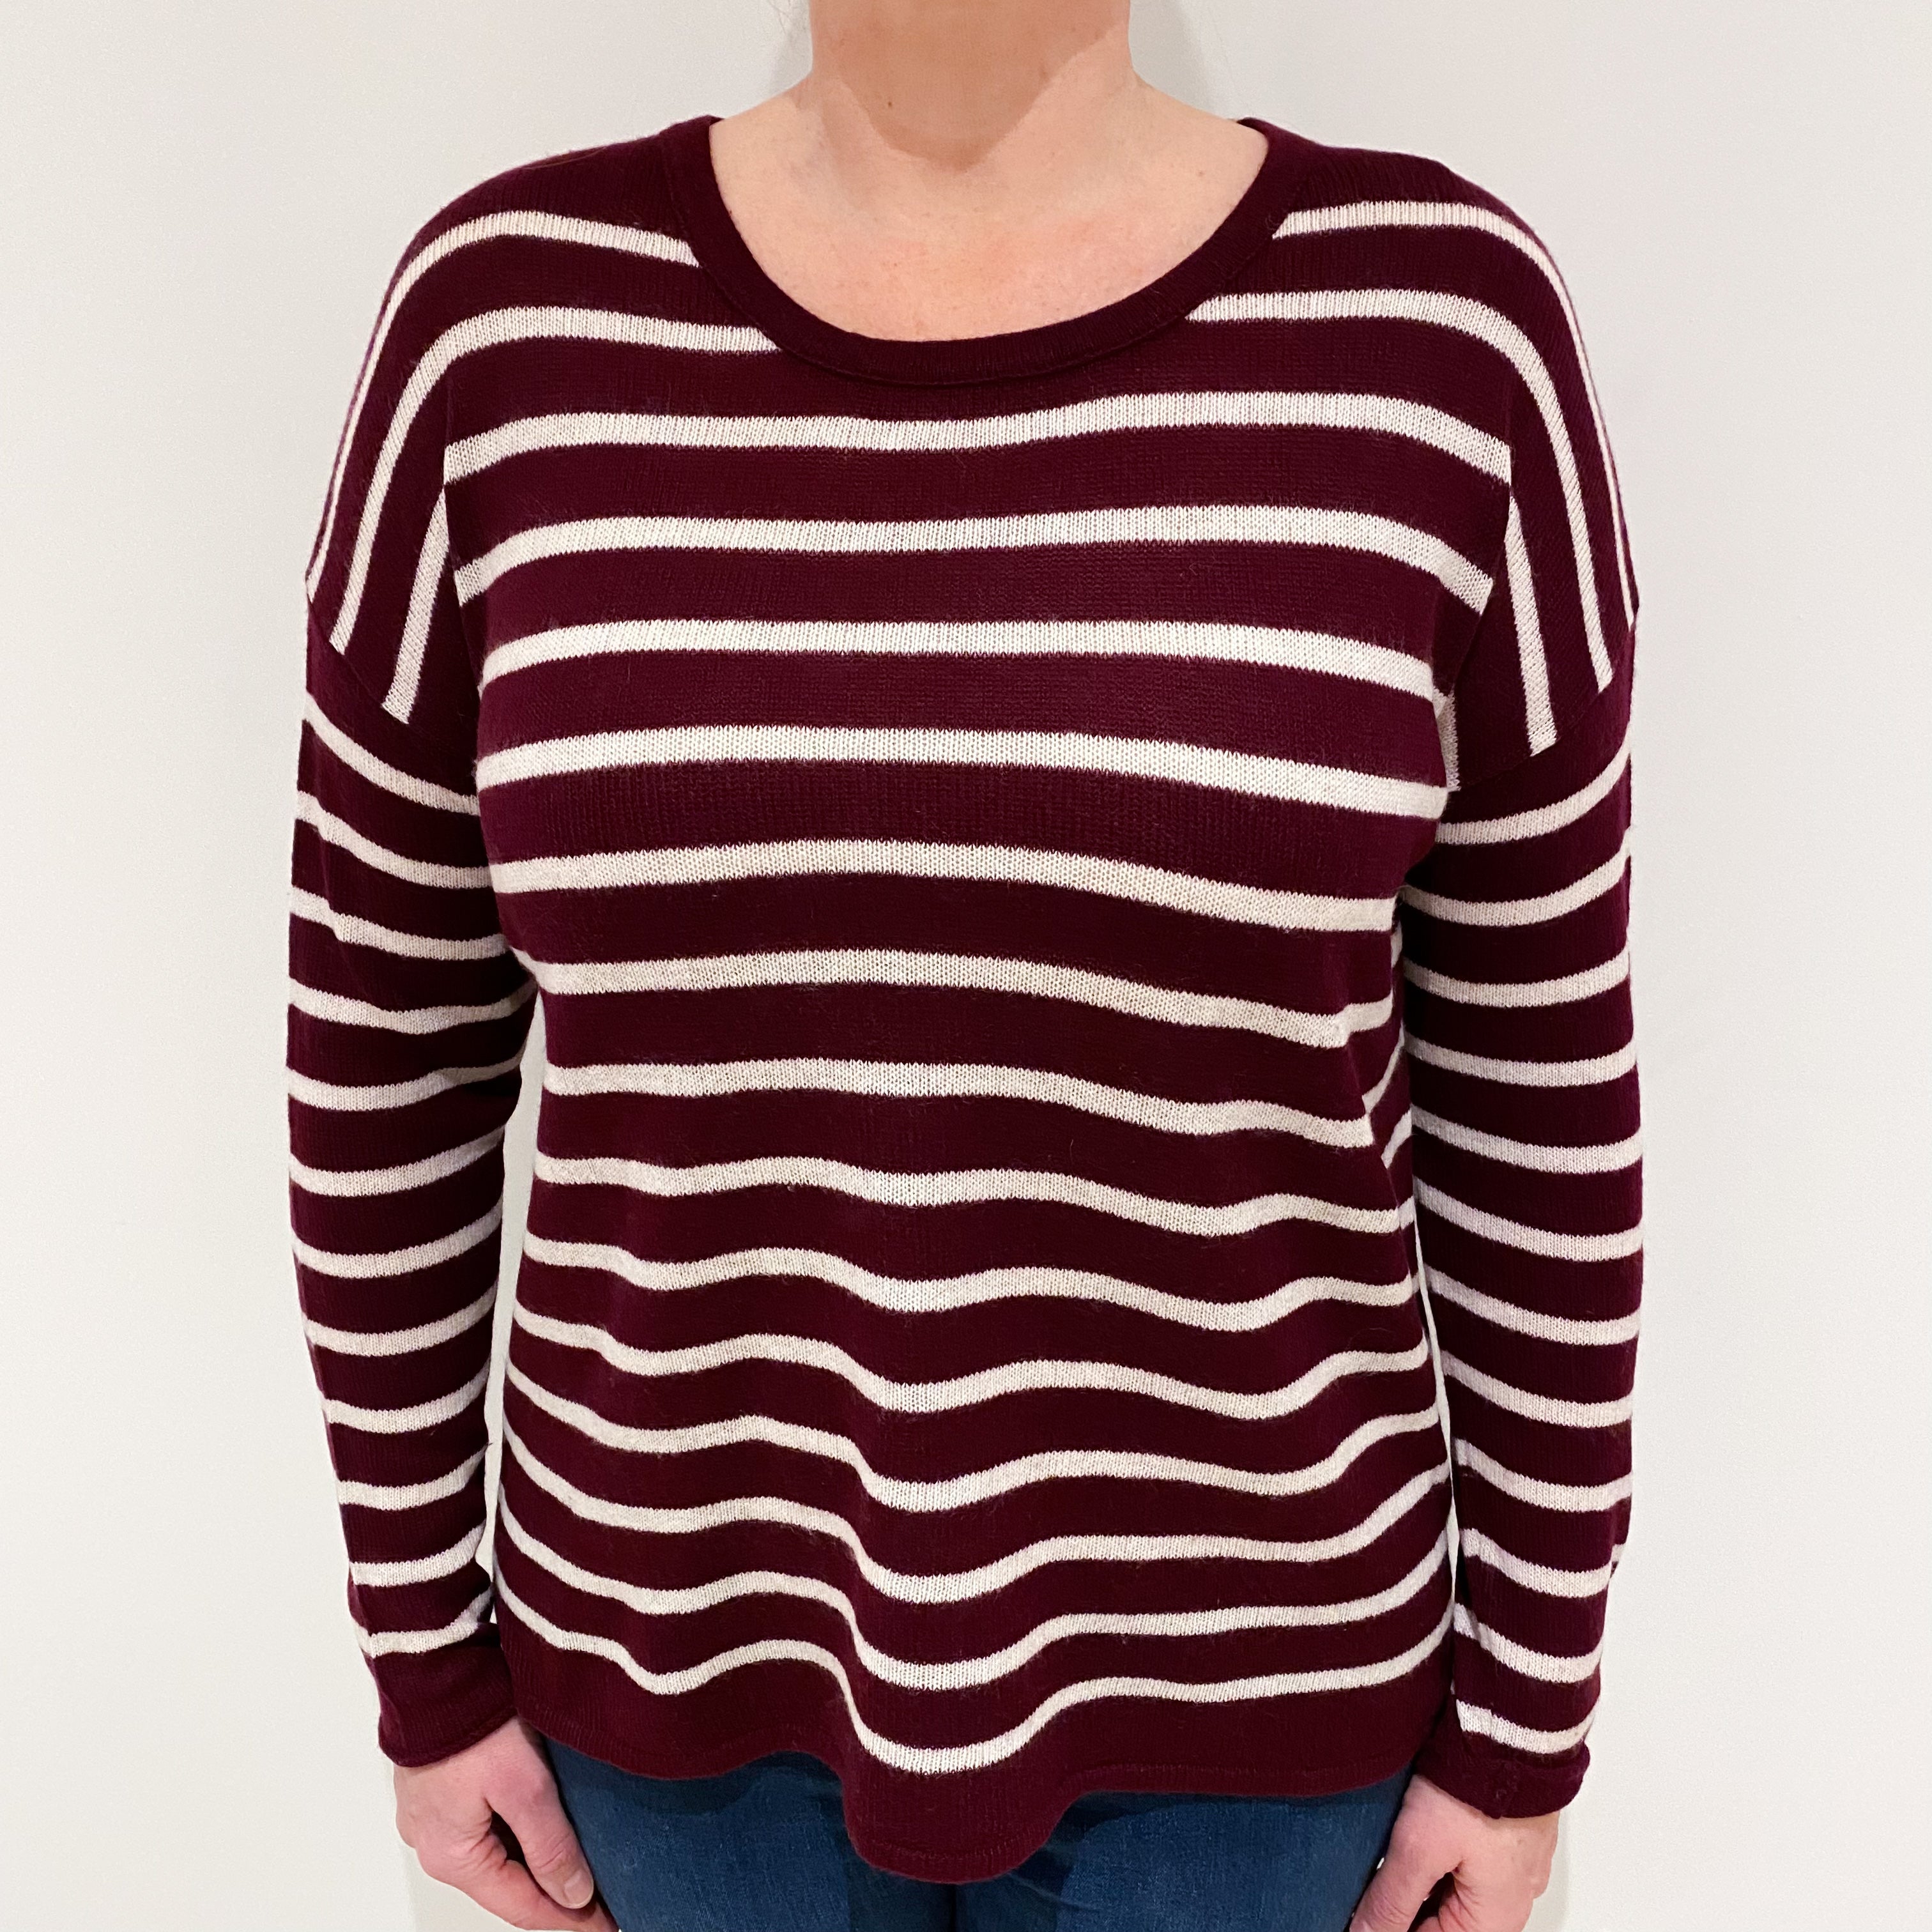 Wine Red and White Striped Lightweight Cashmere Crew Neck Jumper Large